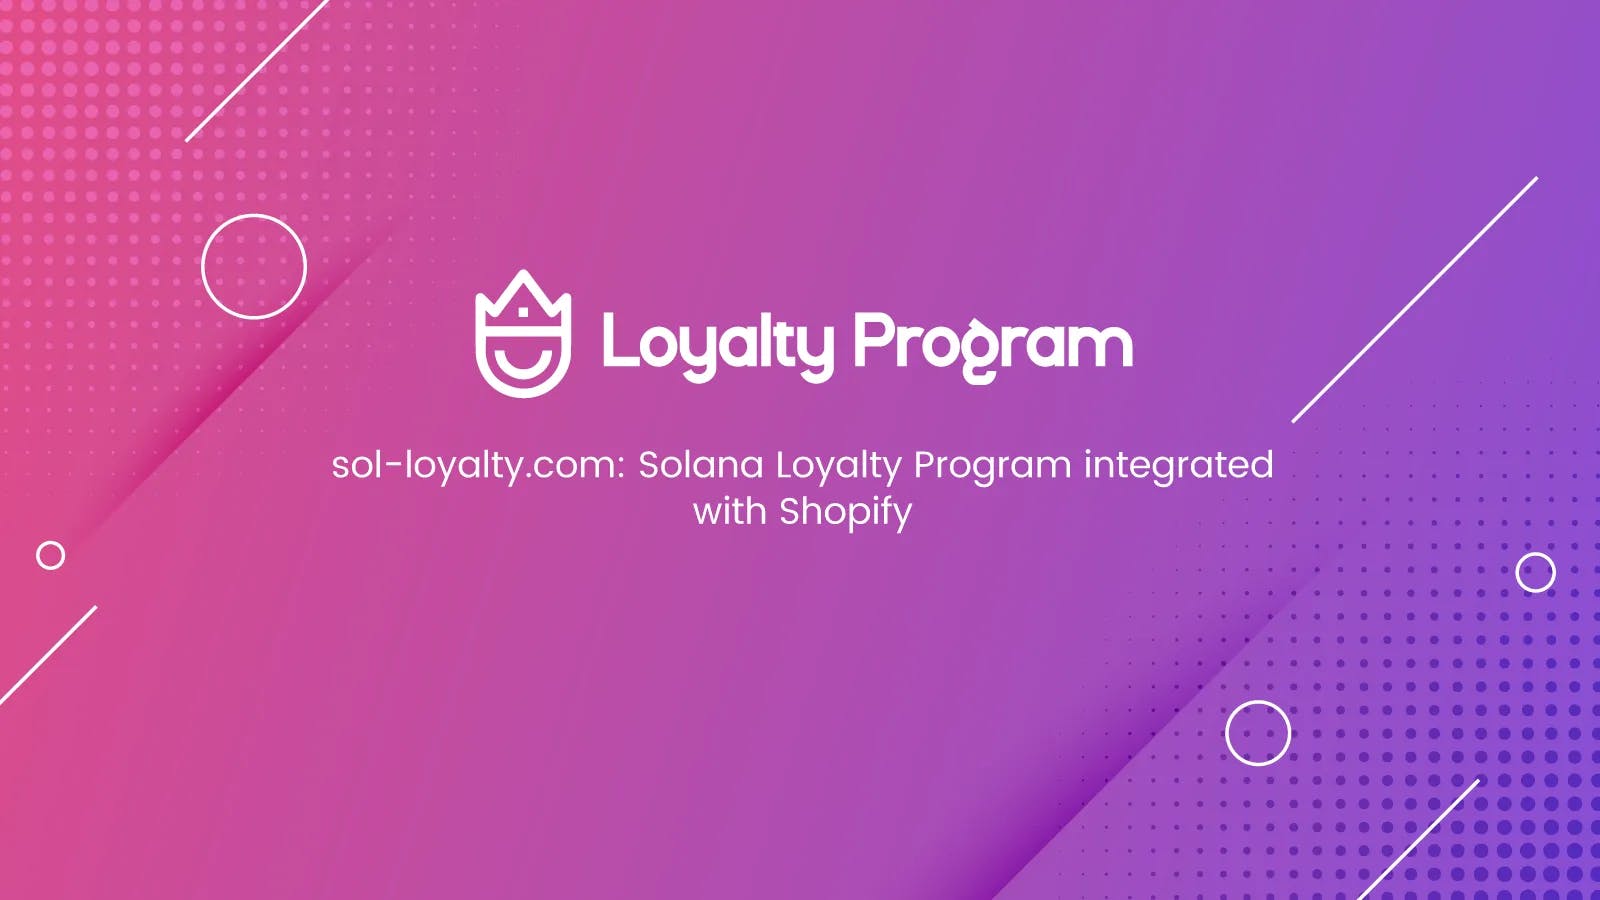 sol-loyalty.com: Solana Loyalty Program integrated with Shopify